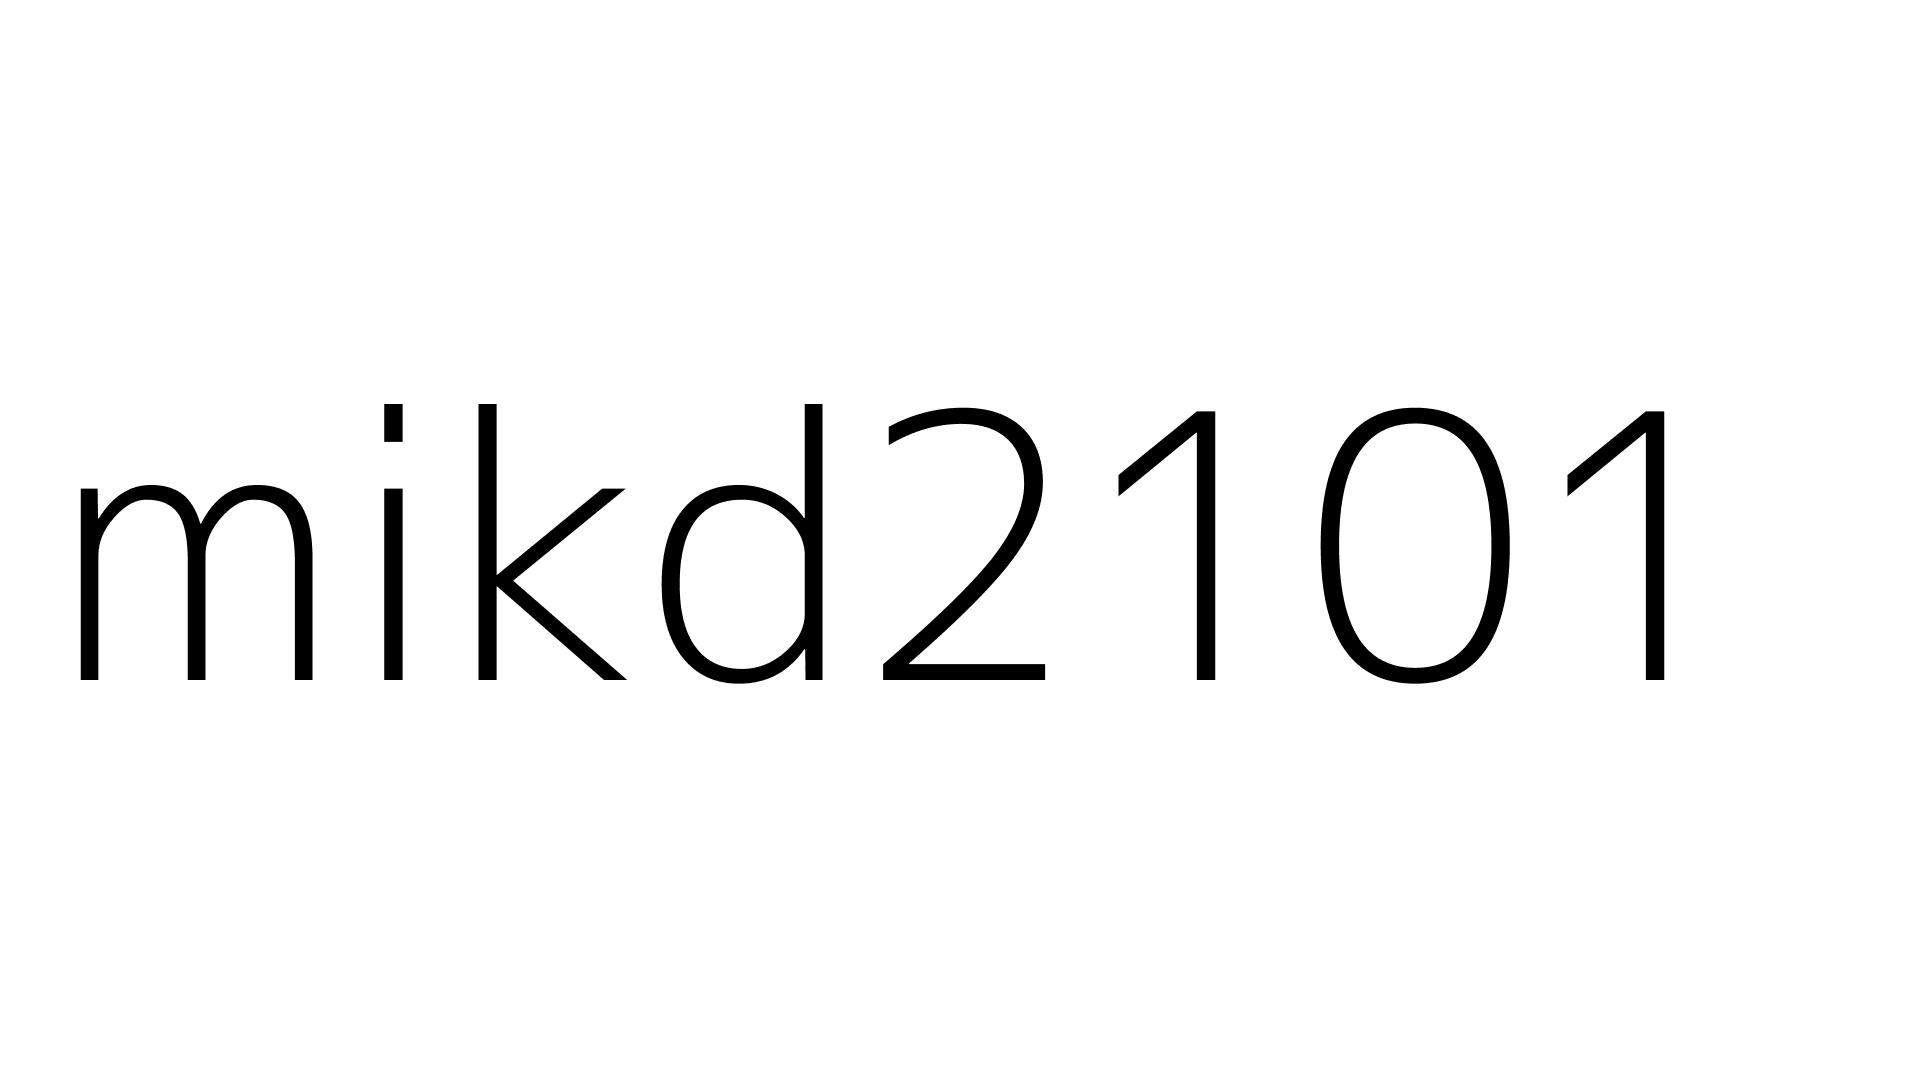 mikd2101